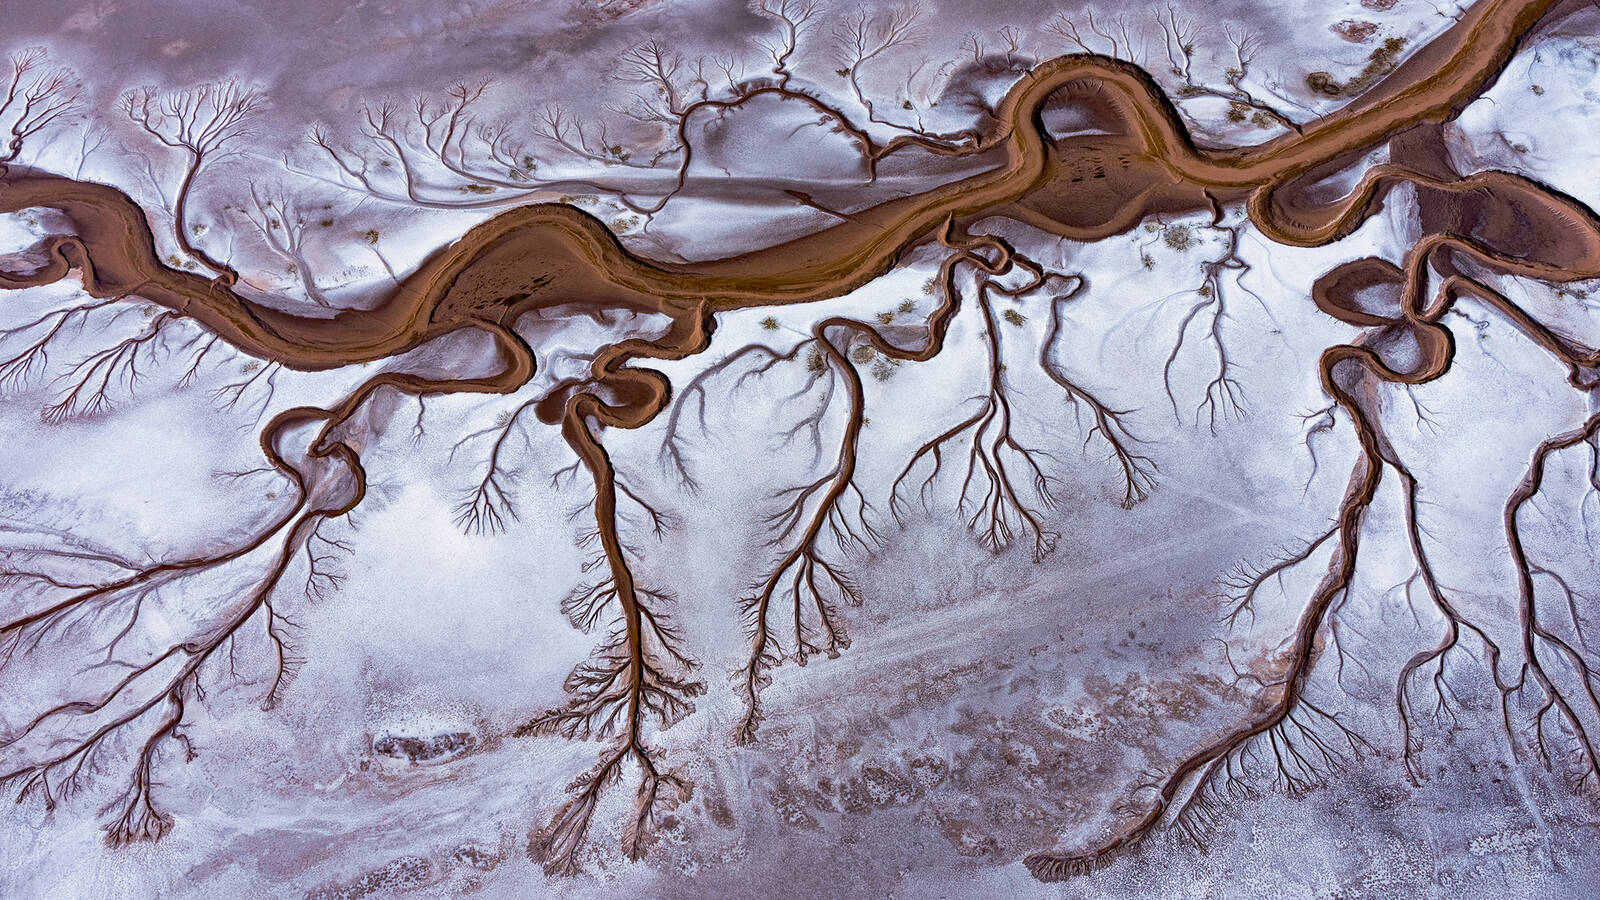 <p>The dry, salt-encrusted Colorado River delta. Pete McBride said he was drawn to the exquisiteness of nature in photos such as this one, but he thinks readers can learn something from these images. “It’s not just normal beauty. It’s sort of a lost, dead beauty,” he said on NPCA's podcast. The river hasn’t flowed naturally all the way to the Sea of Cortez in Mexico in decades.</p>